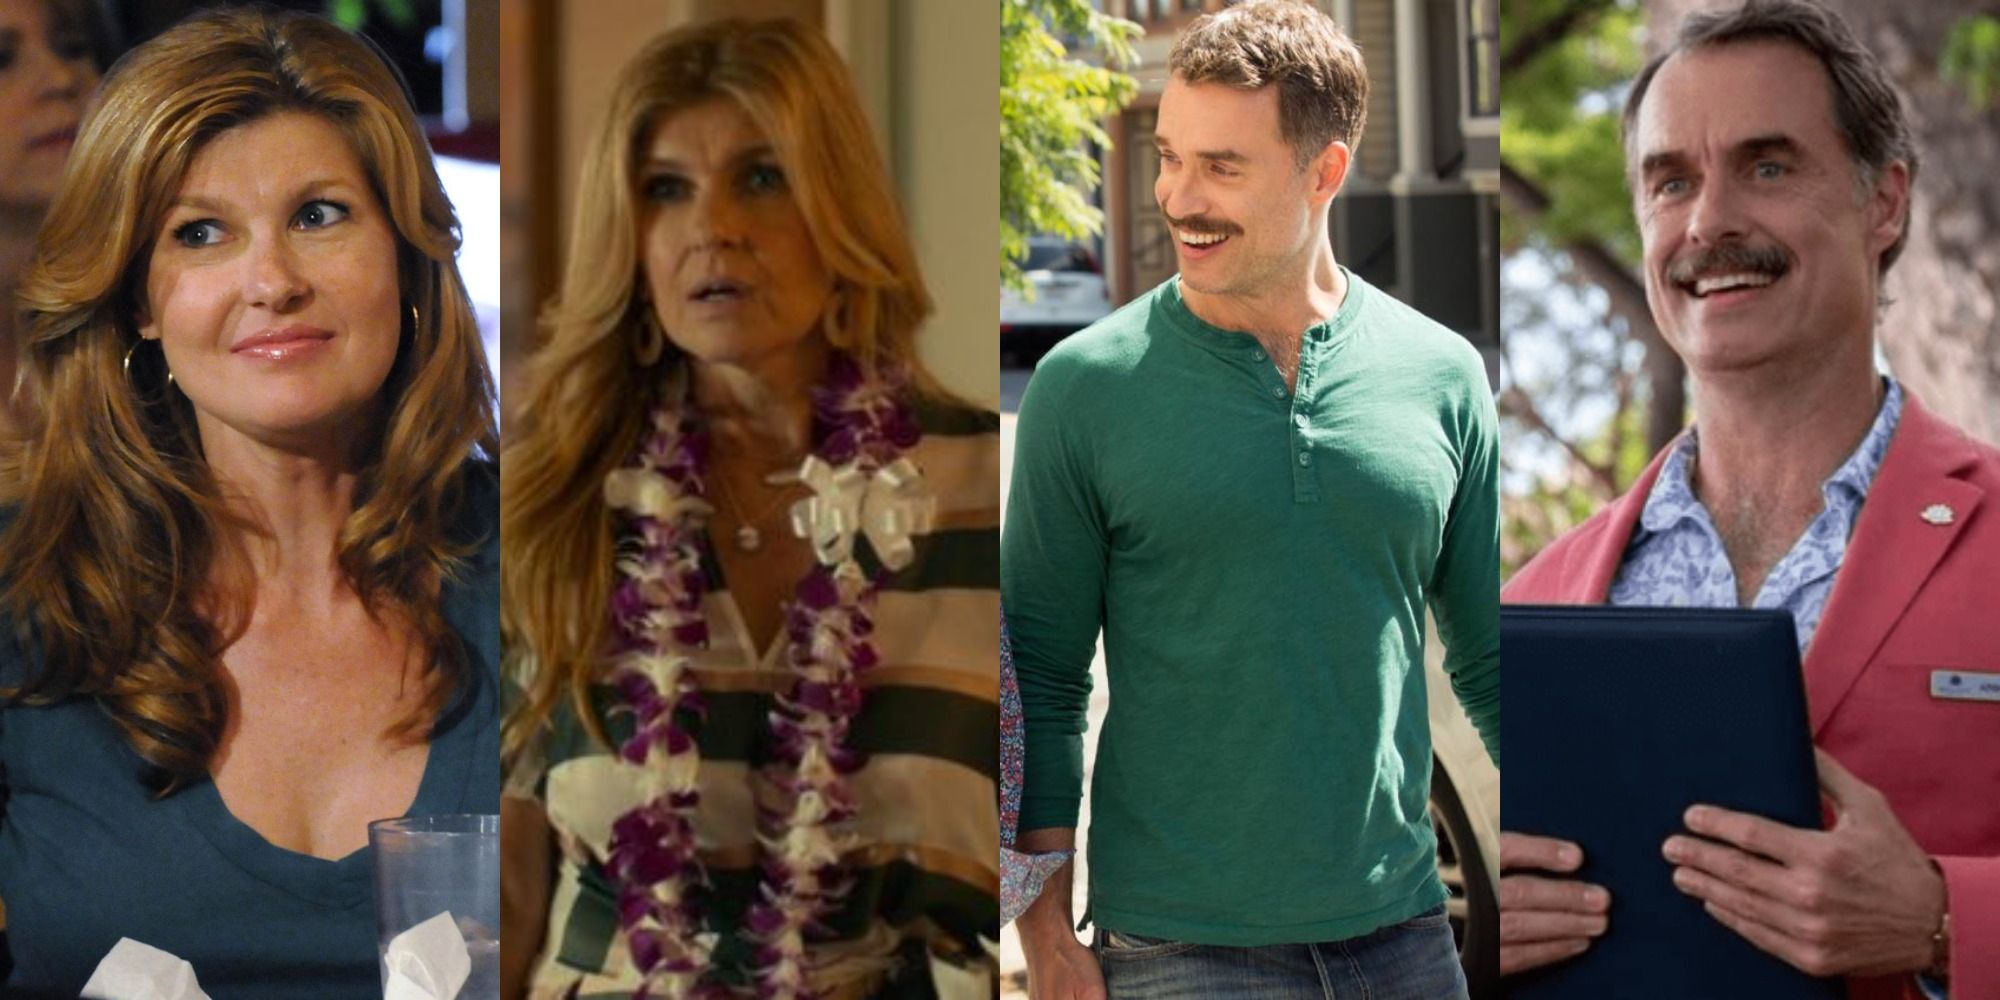 Split image showing Connie Britton in Friday Night Lights and The White Lotus and Murray Bartlett in Looking and The White Lotus